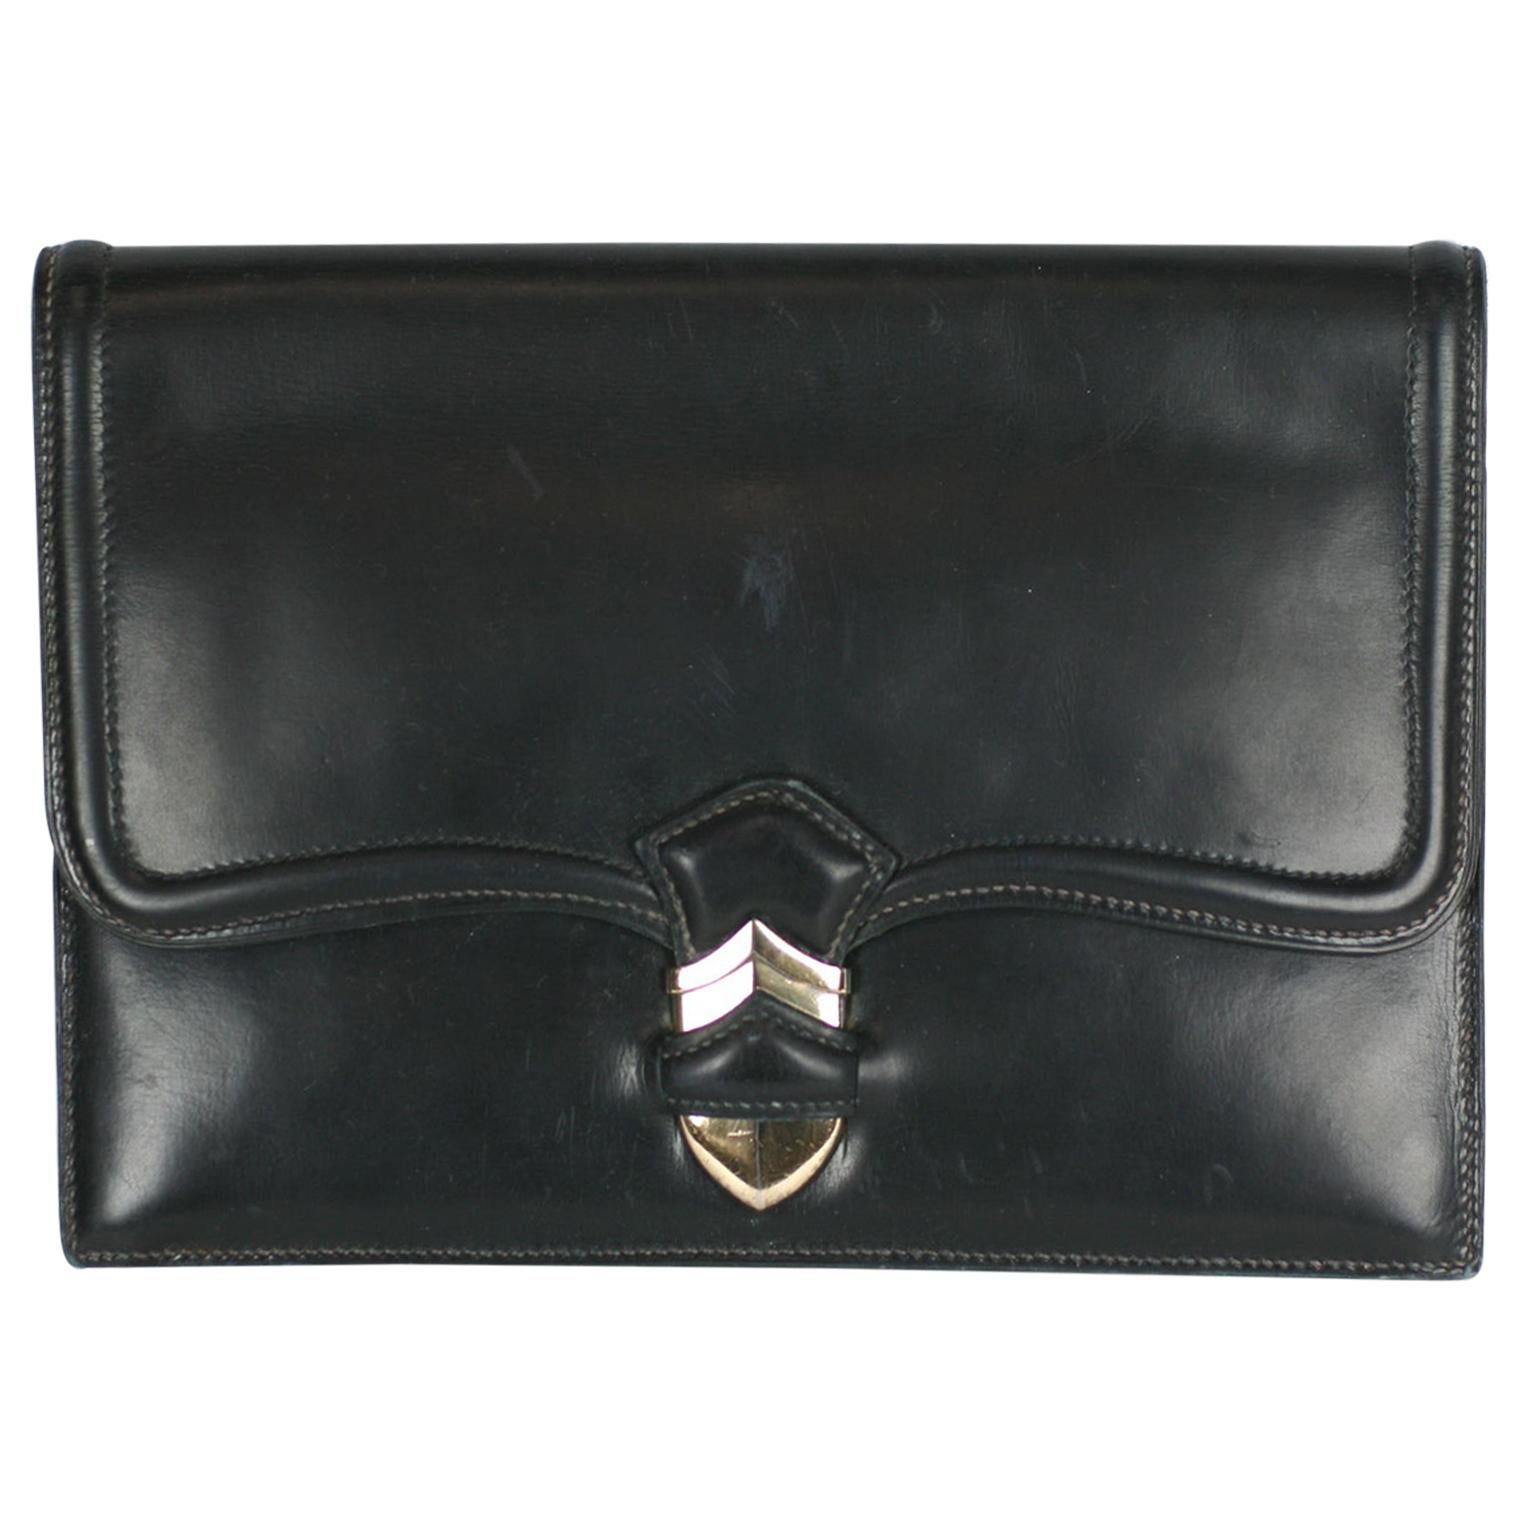 Hermes Navy Calf Pan Clutch with Sterling Silver Hardware